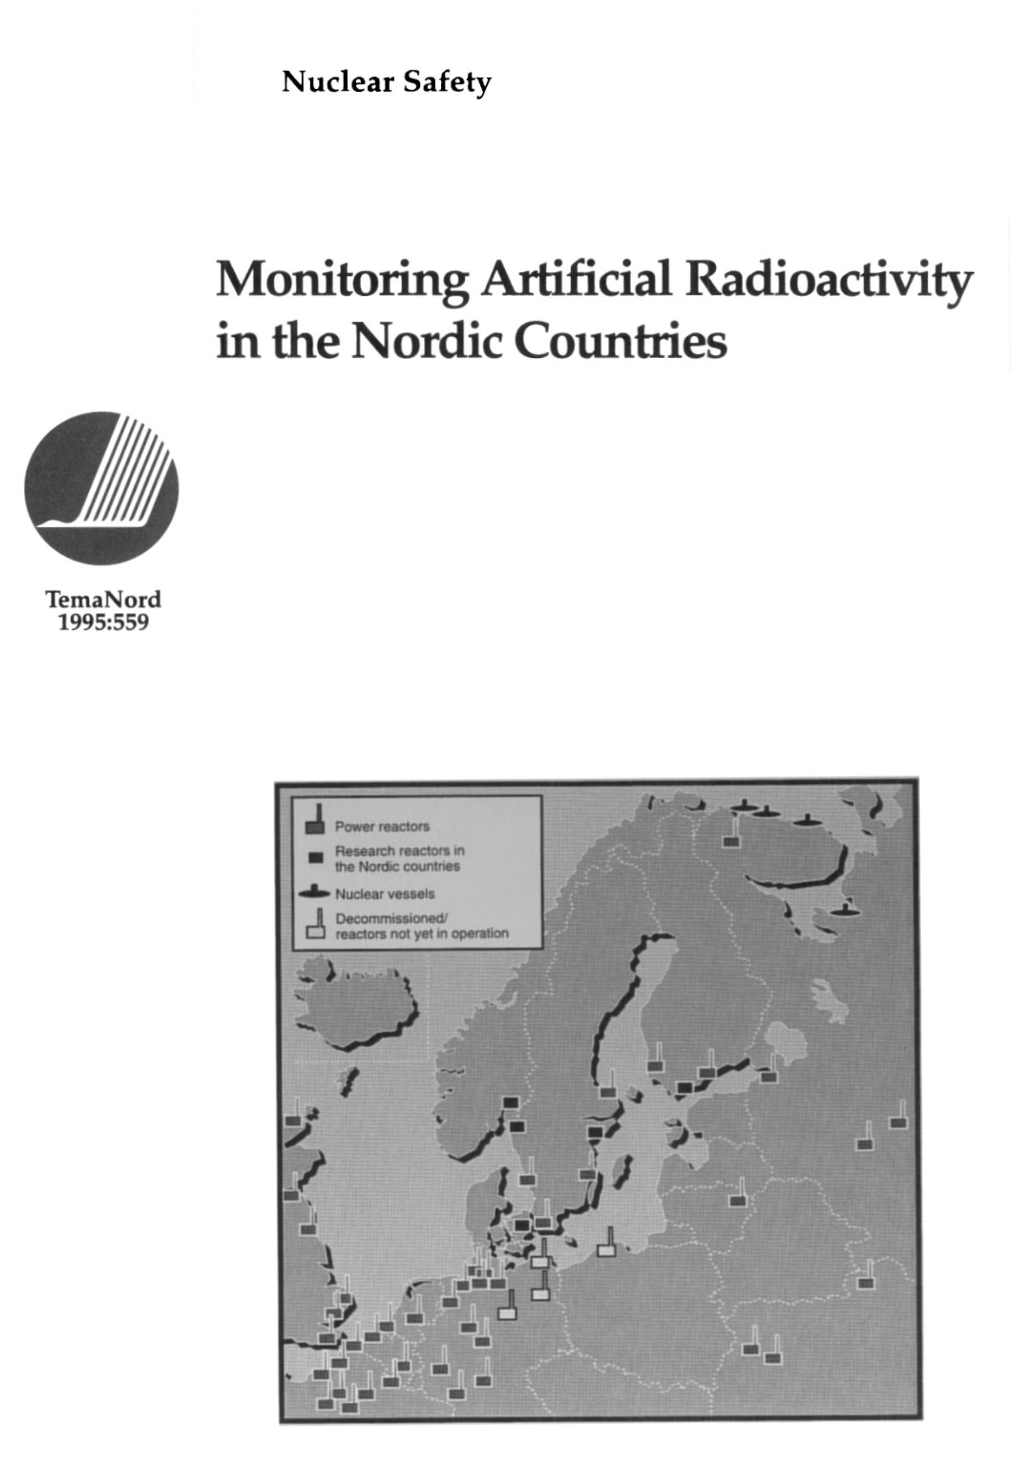 Monitoring Artificial Radioactivity in the Nordic Countries